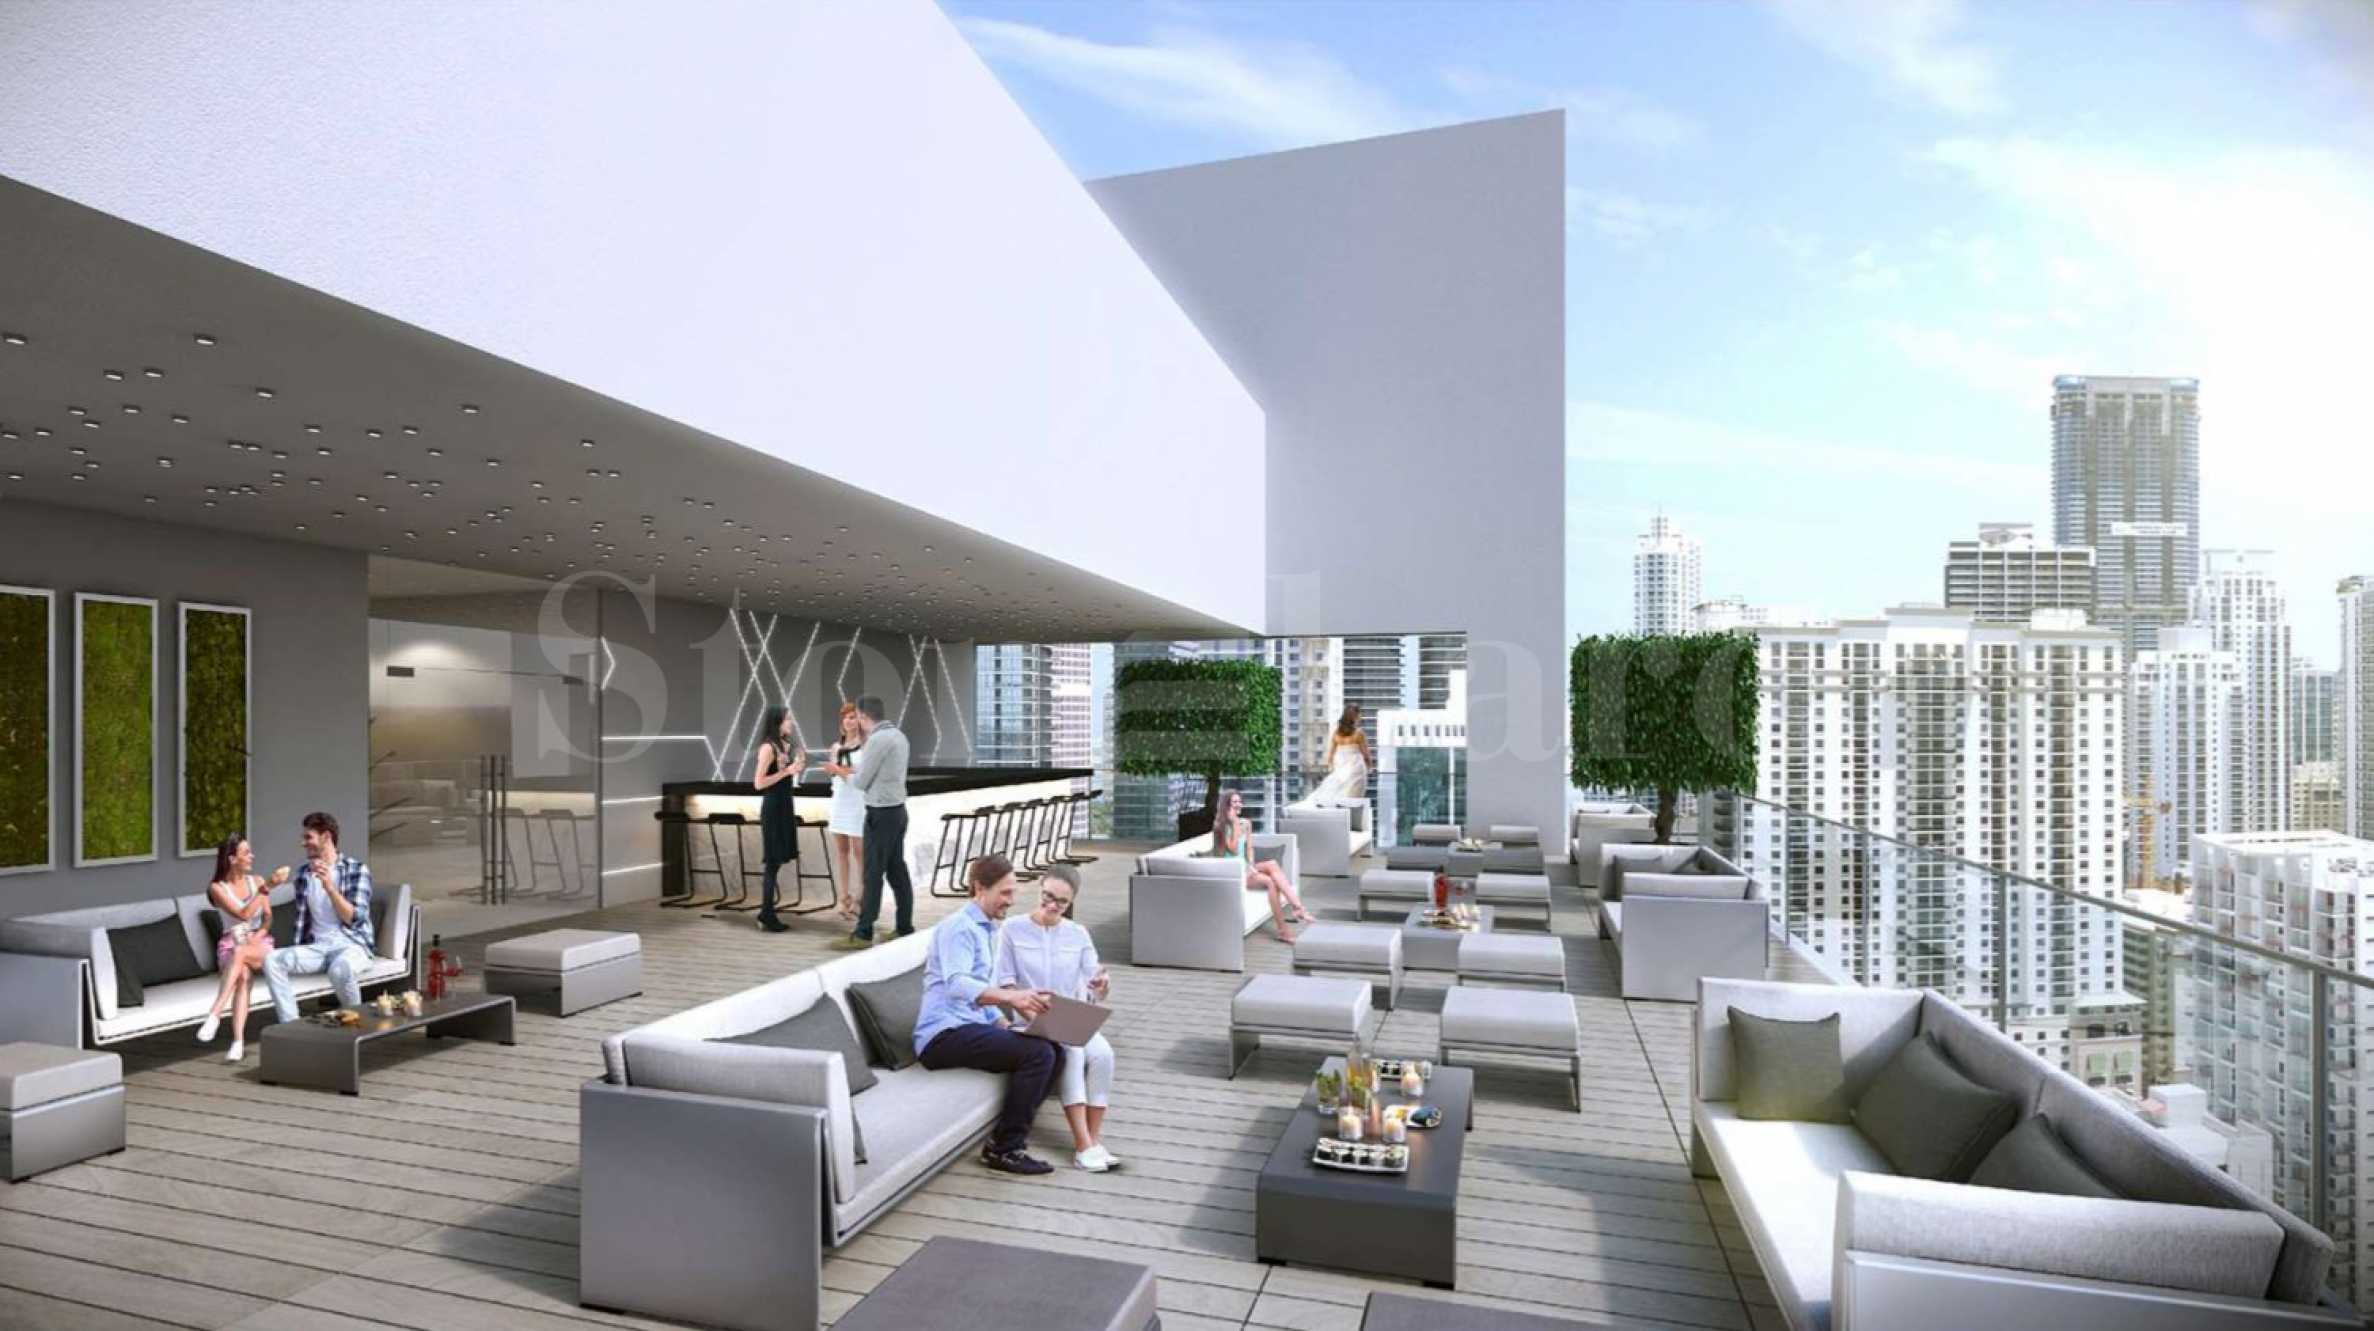 Smart Brickell-the first 